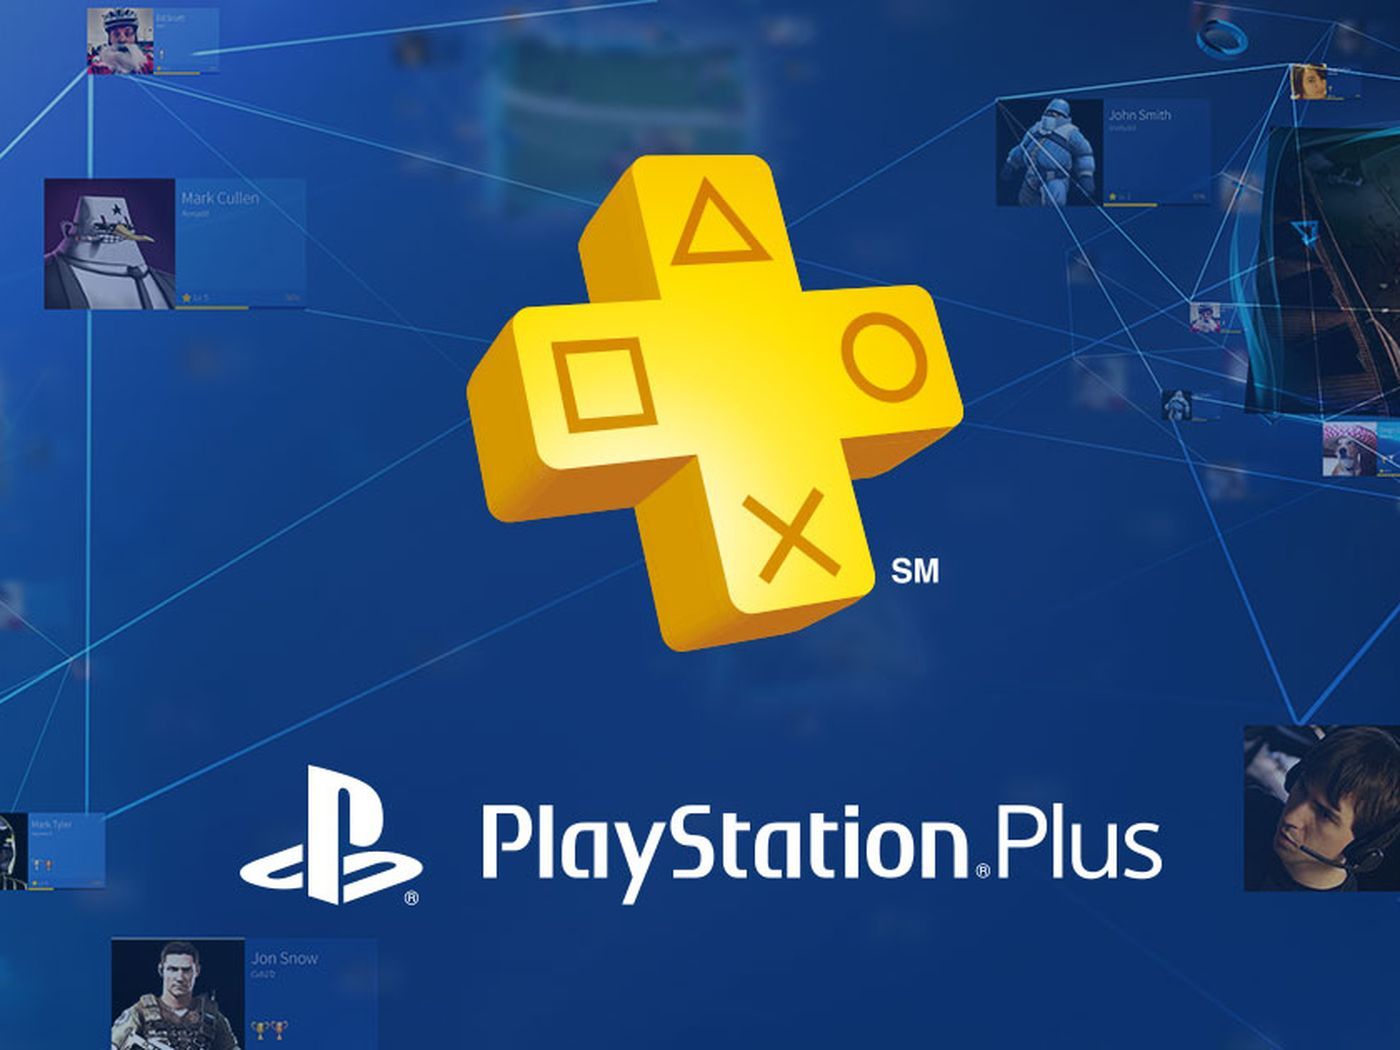 PS Plus Free Games For January 2021 That You Need to Look Forward to